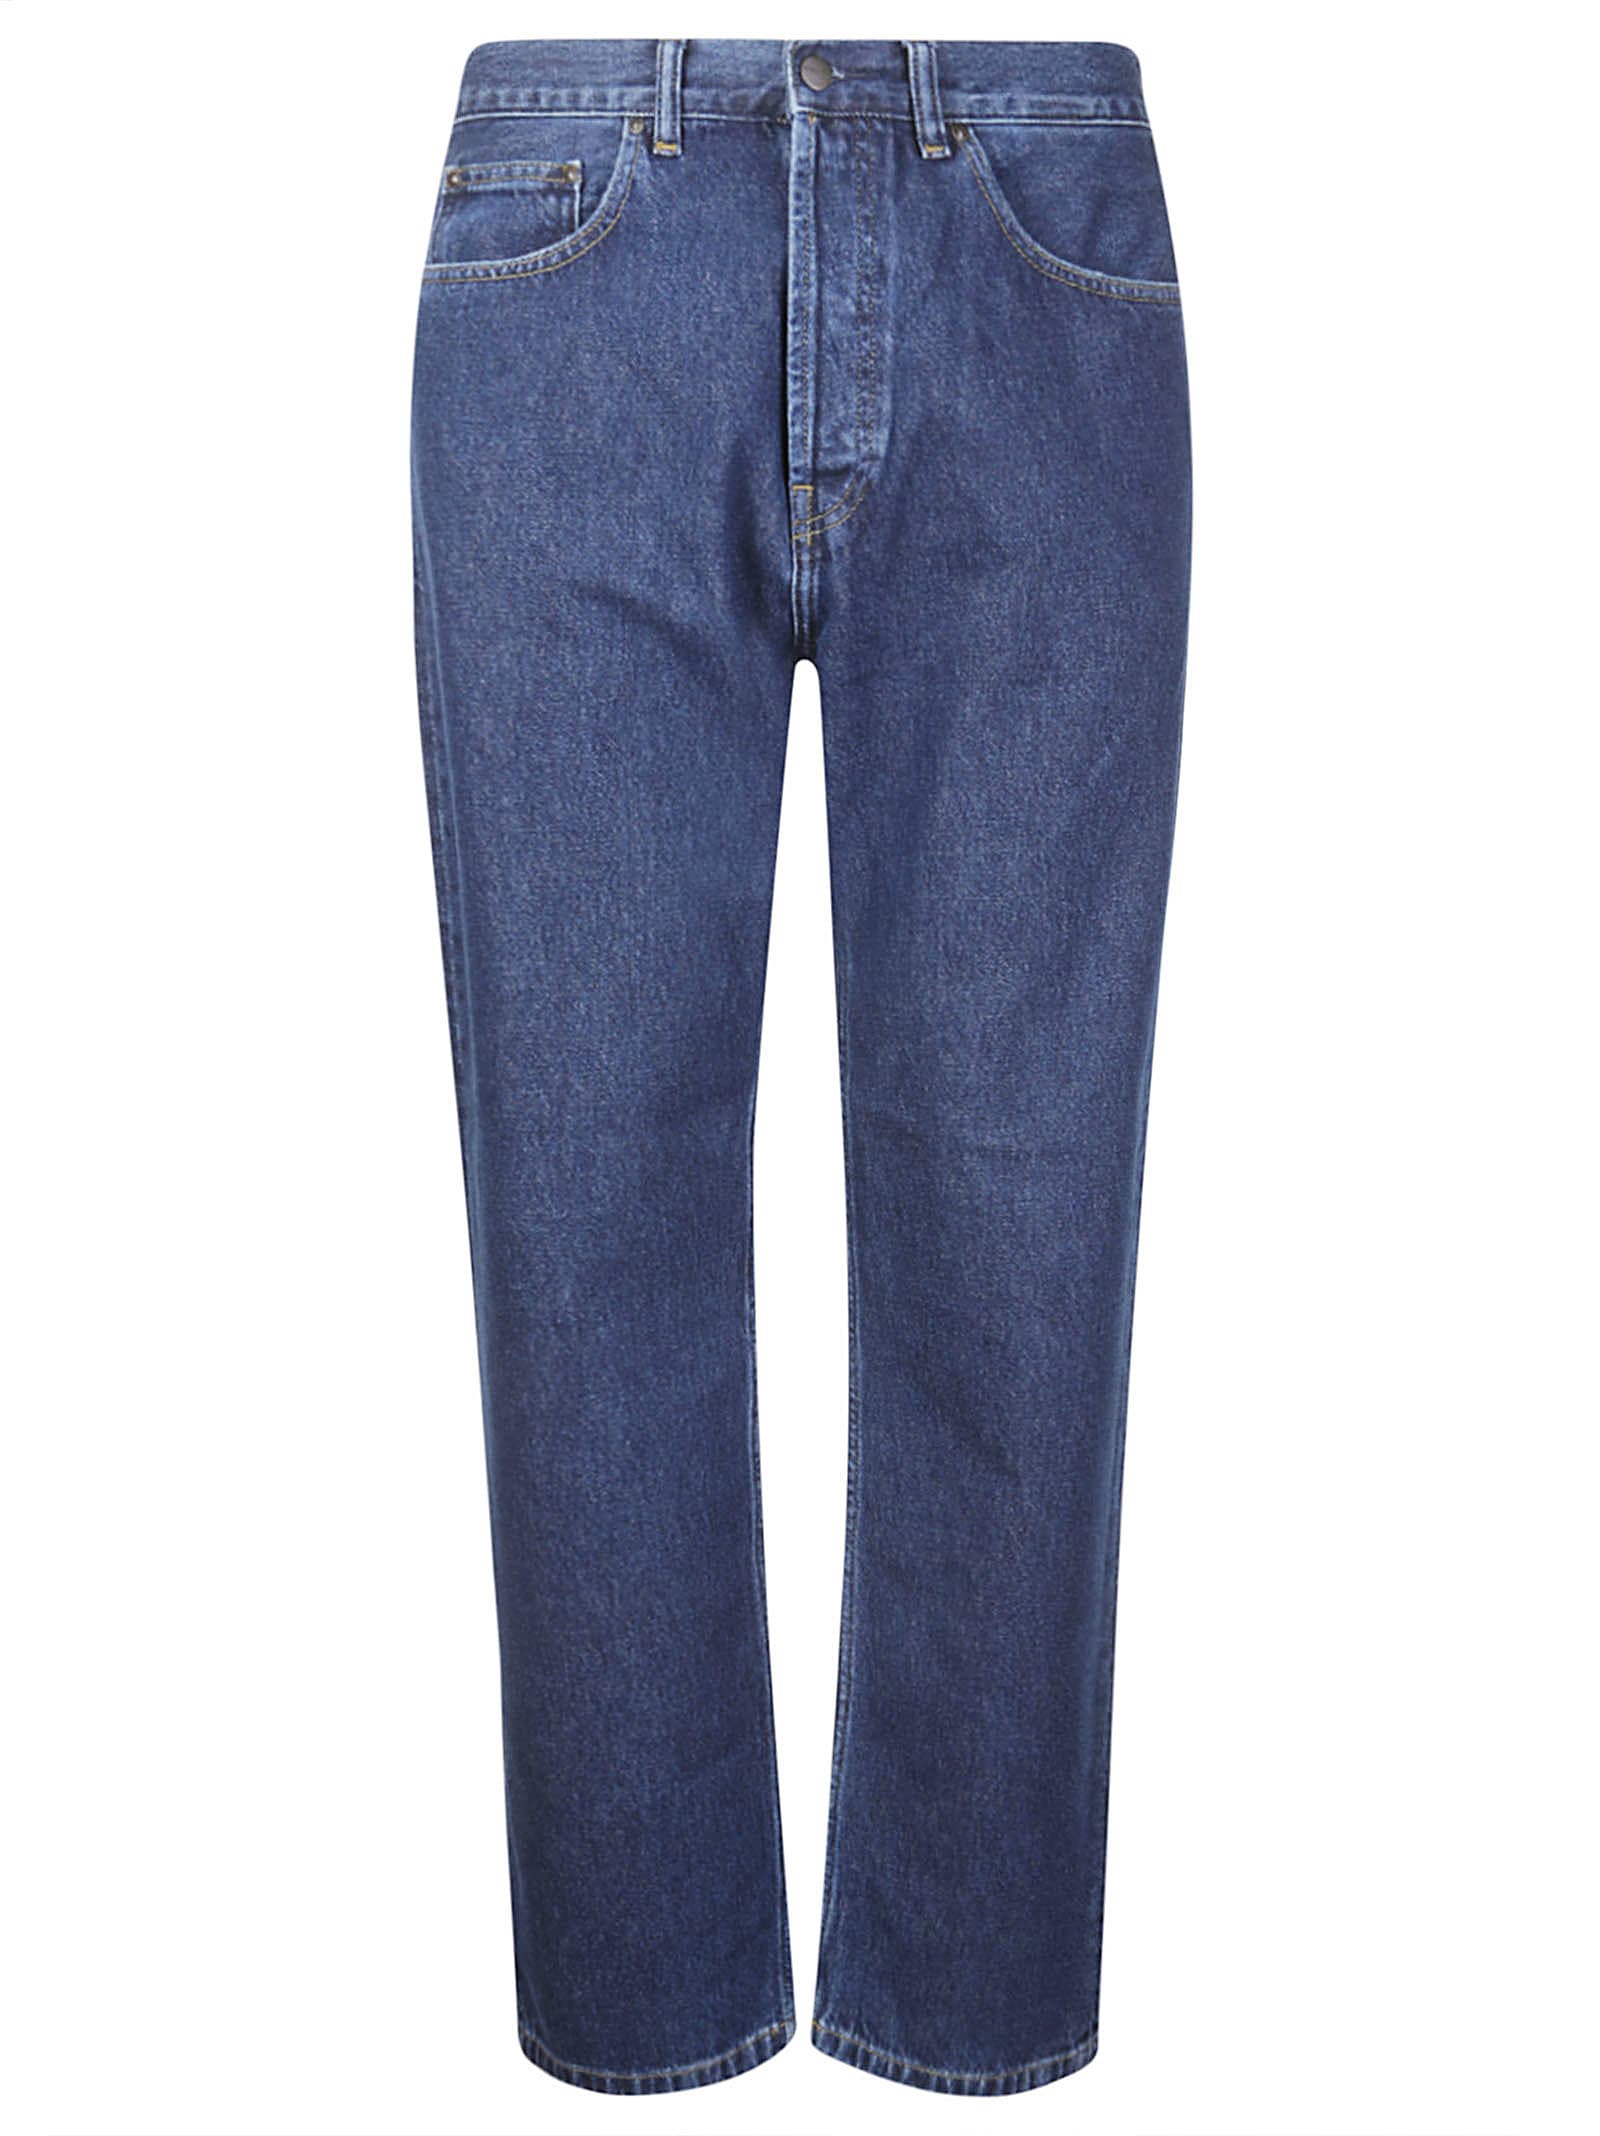 Carhartt Nolan Pant In Blue Stone Washed